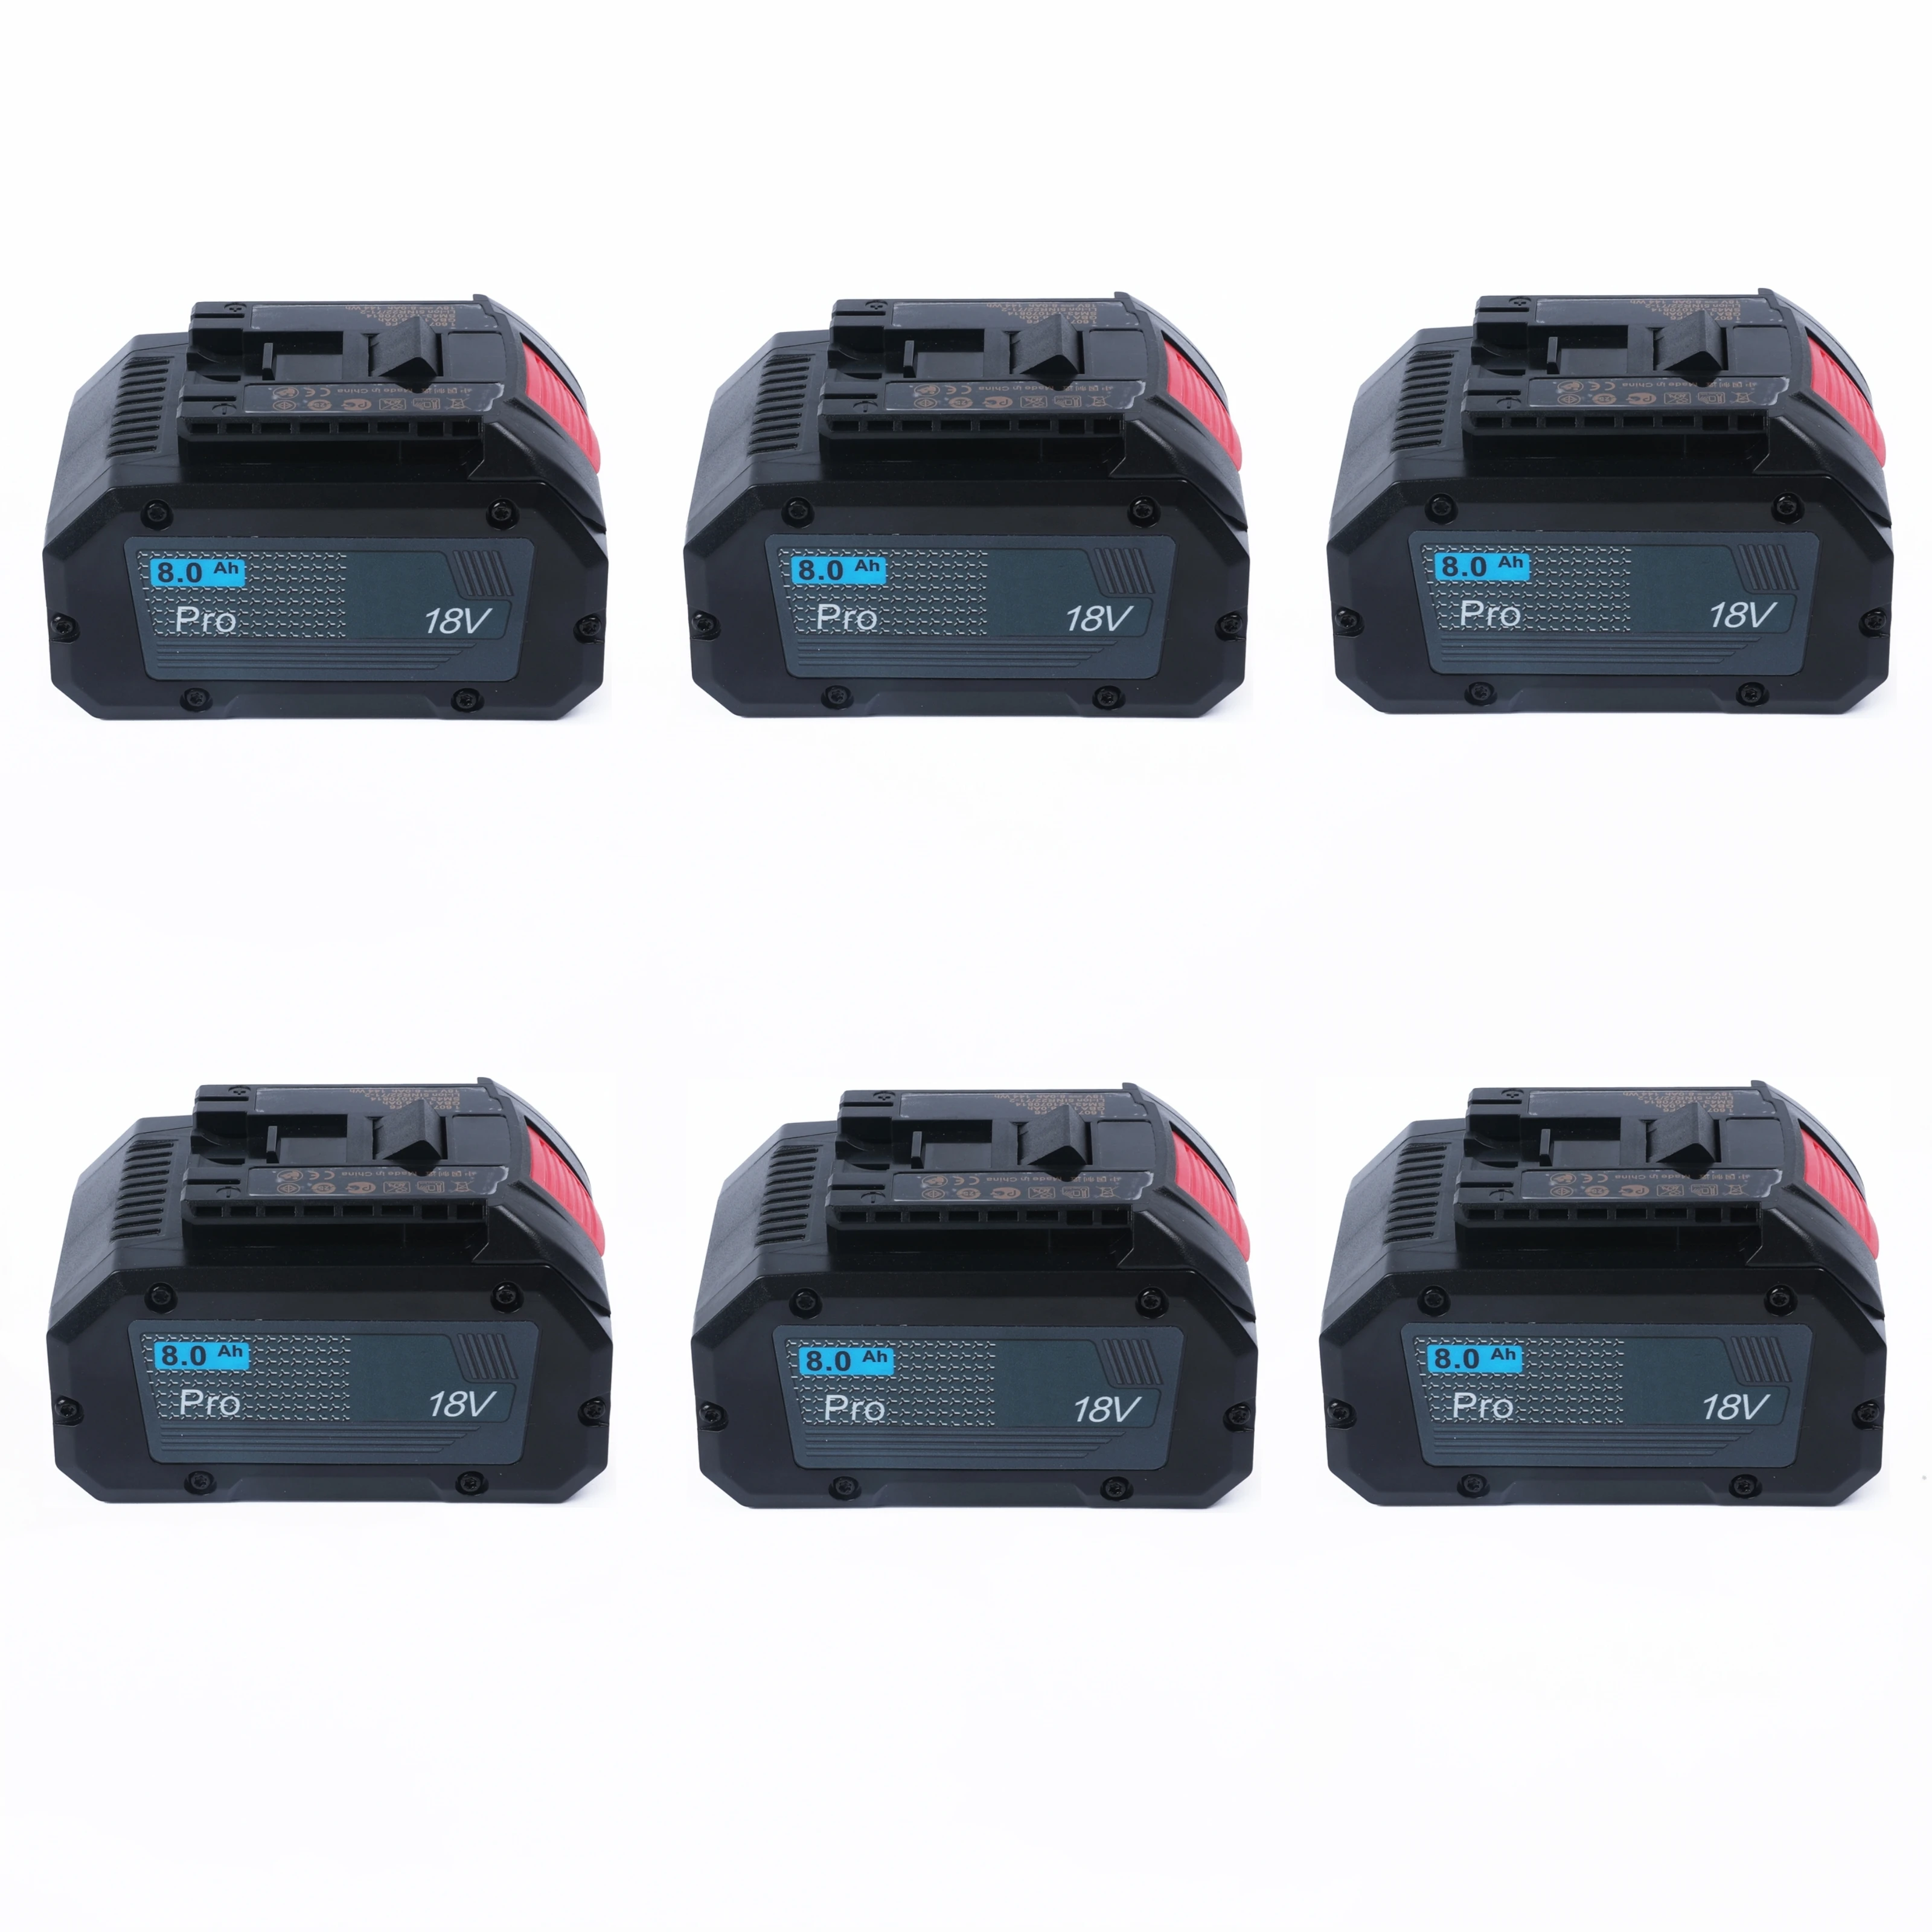 

6Pack New 18V 8.0Ah Lithium-Ion Battery Pack Akku for Bosch 18V MAX Cordless Power Tools Drill Saw Hammer for GBA18V80 GBA18V120